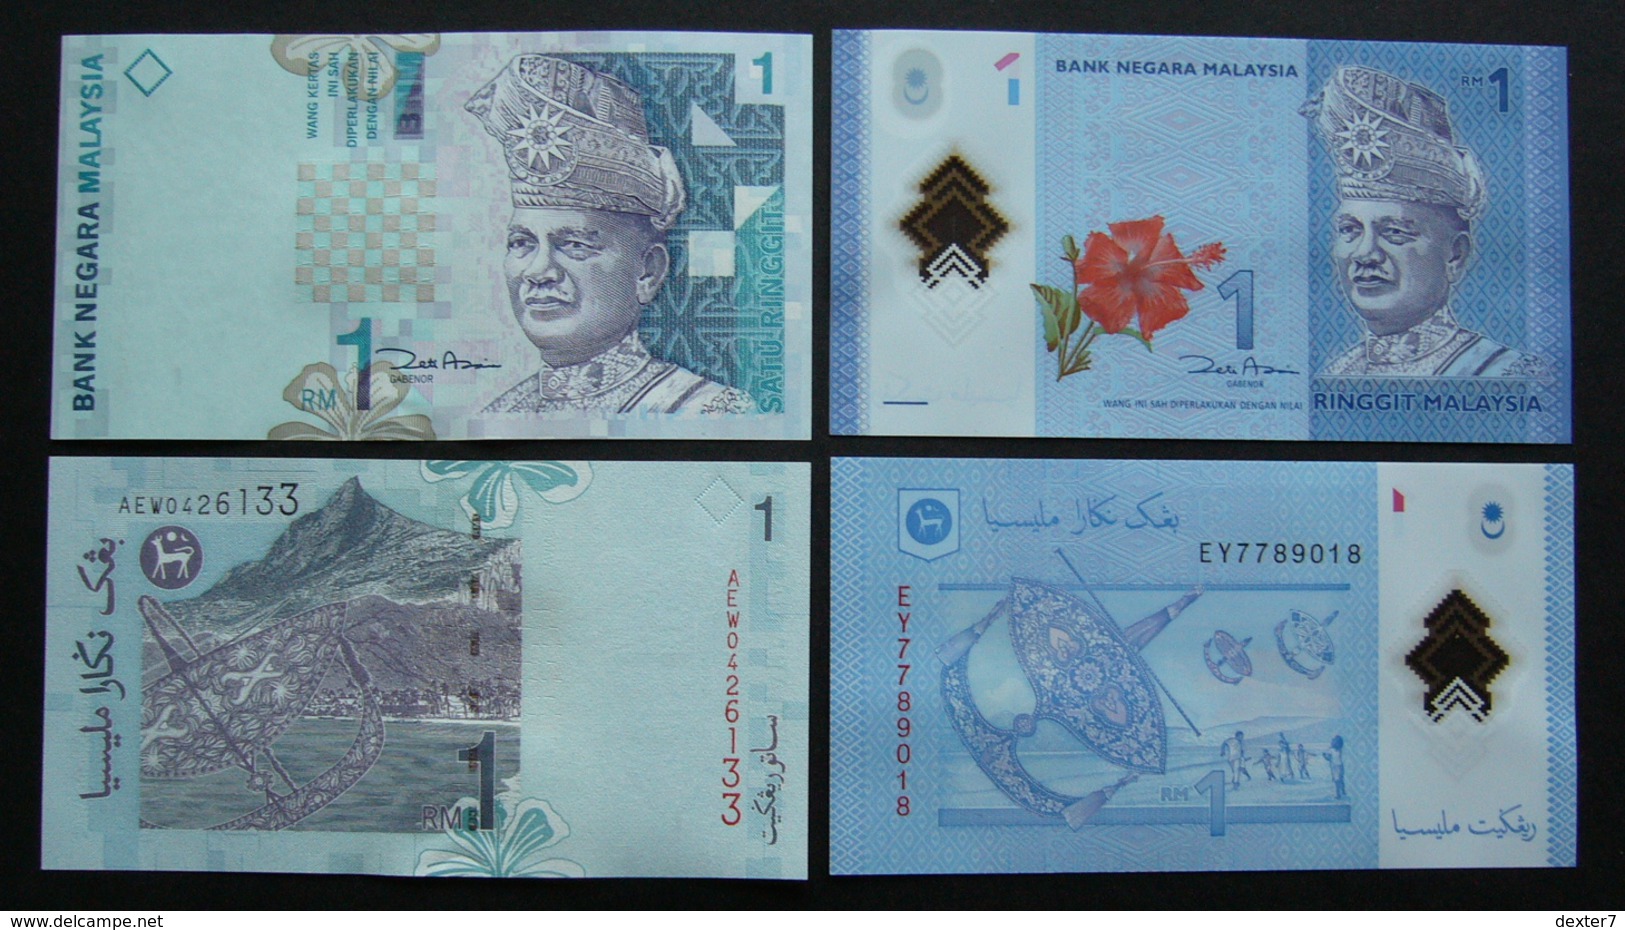 Malesia 1 + 1 Ringgit FDS Malaysia UNC Paper + Polymer - Maleisië